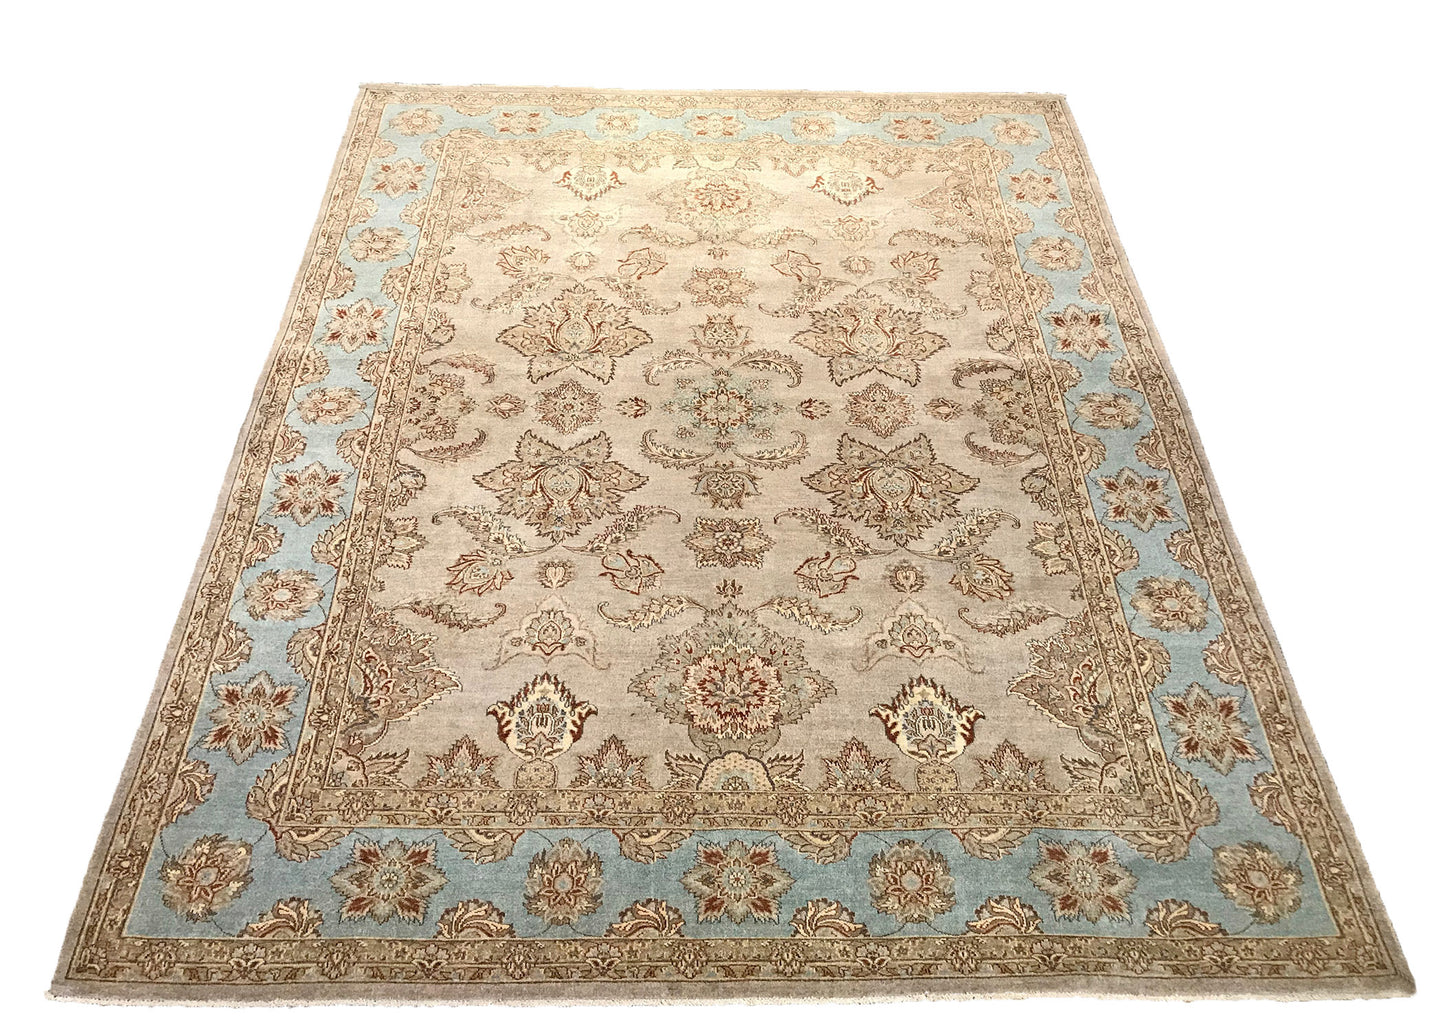 one of a kind pakistan oshak 8 x 10 area rug hand-knotted handmade traditional area rug online rug store